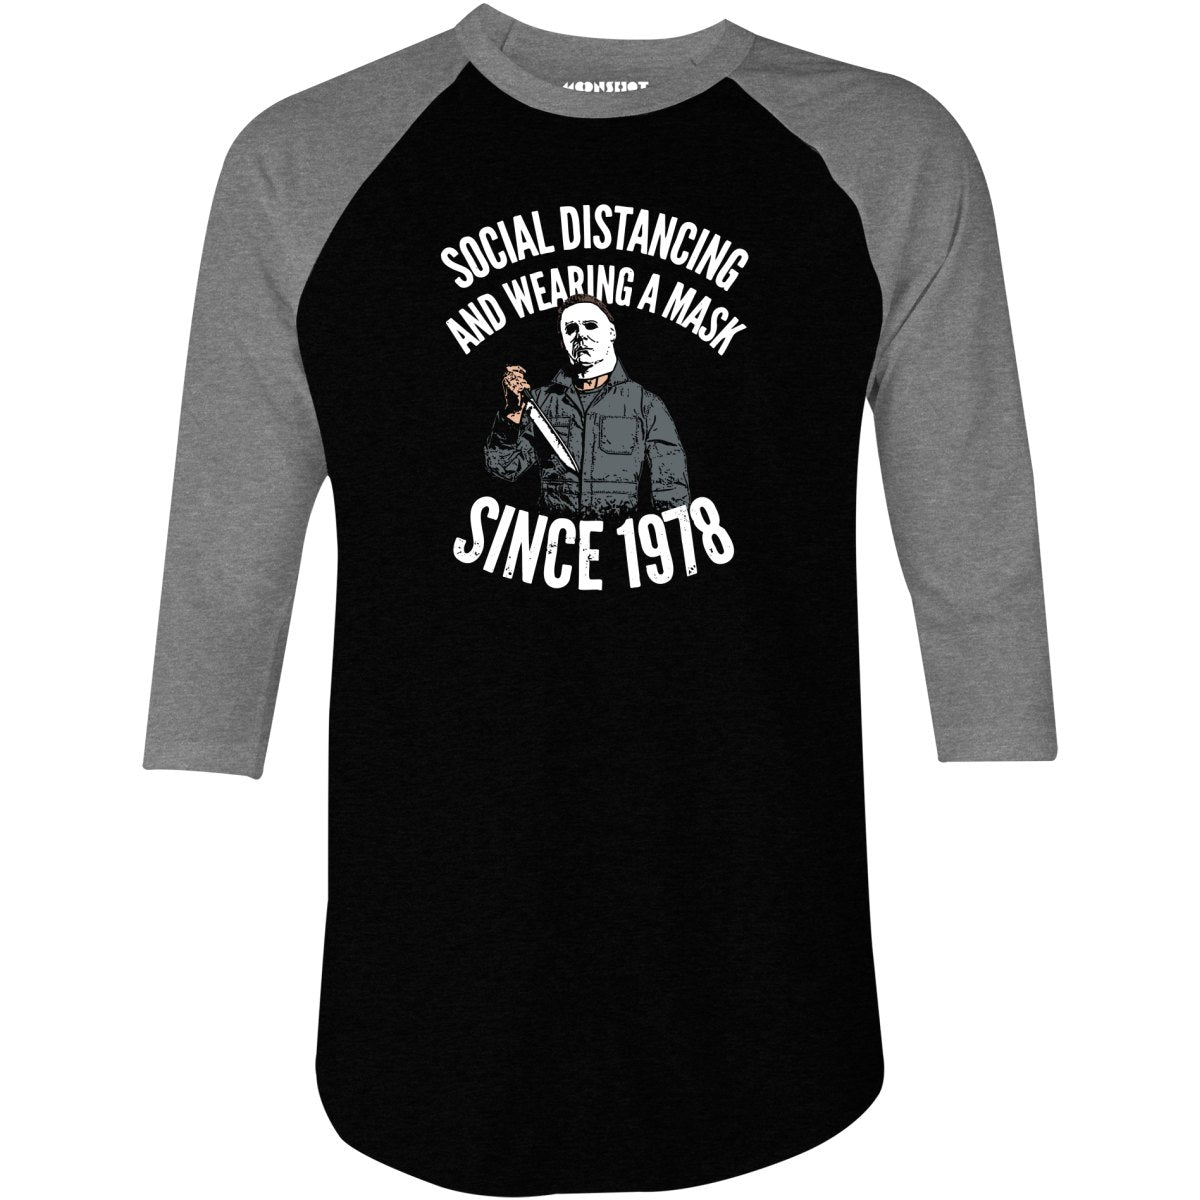 Social Distancing and Wearing a Mask Since 1978 - 3/4 Sleeve Raglan T-Shirt